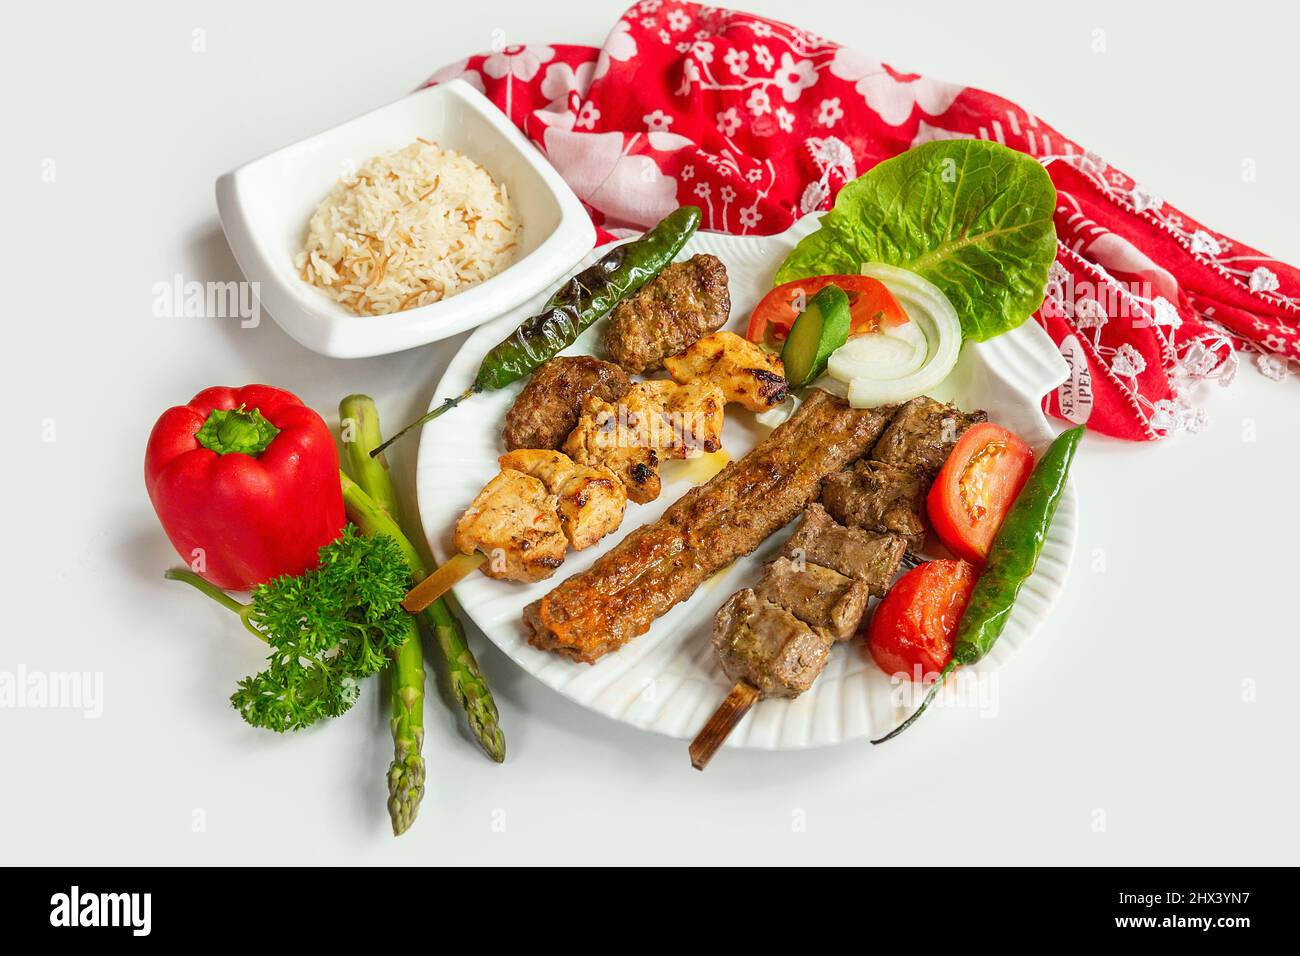 Selection of BBQ chicken tikka and seekh kebabs served with rice salad in a dish isolated on colorful table cloth top view on grey background Stock Photo